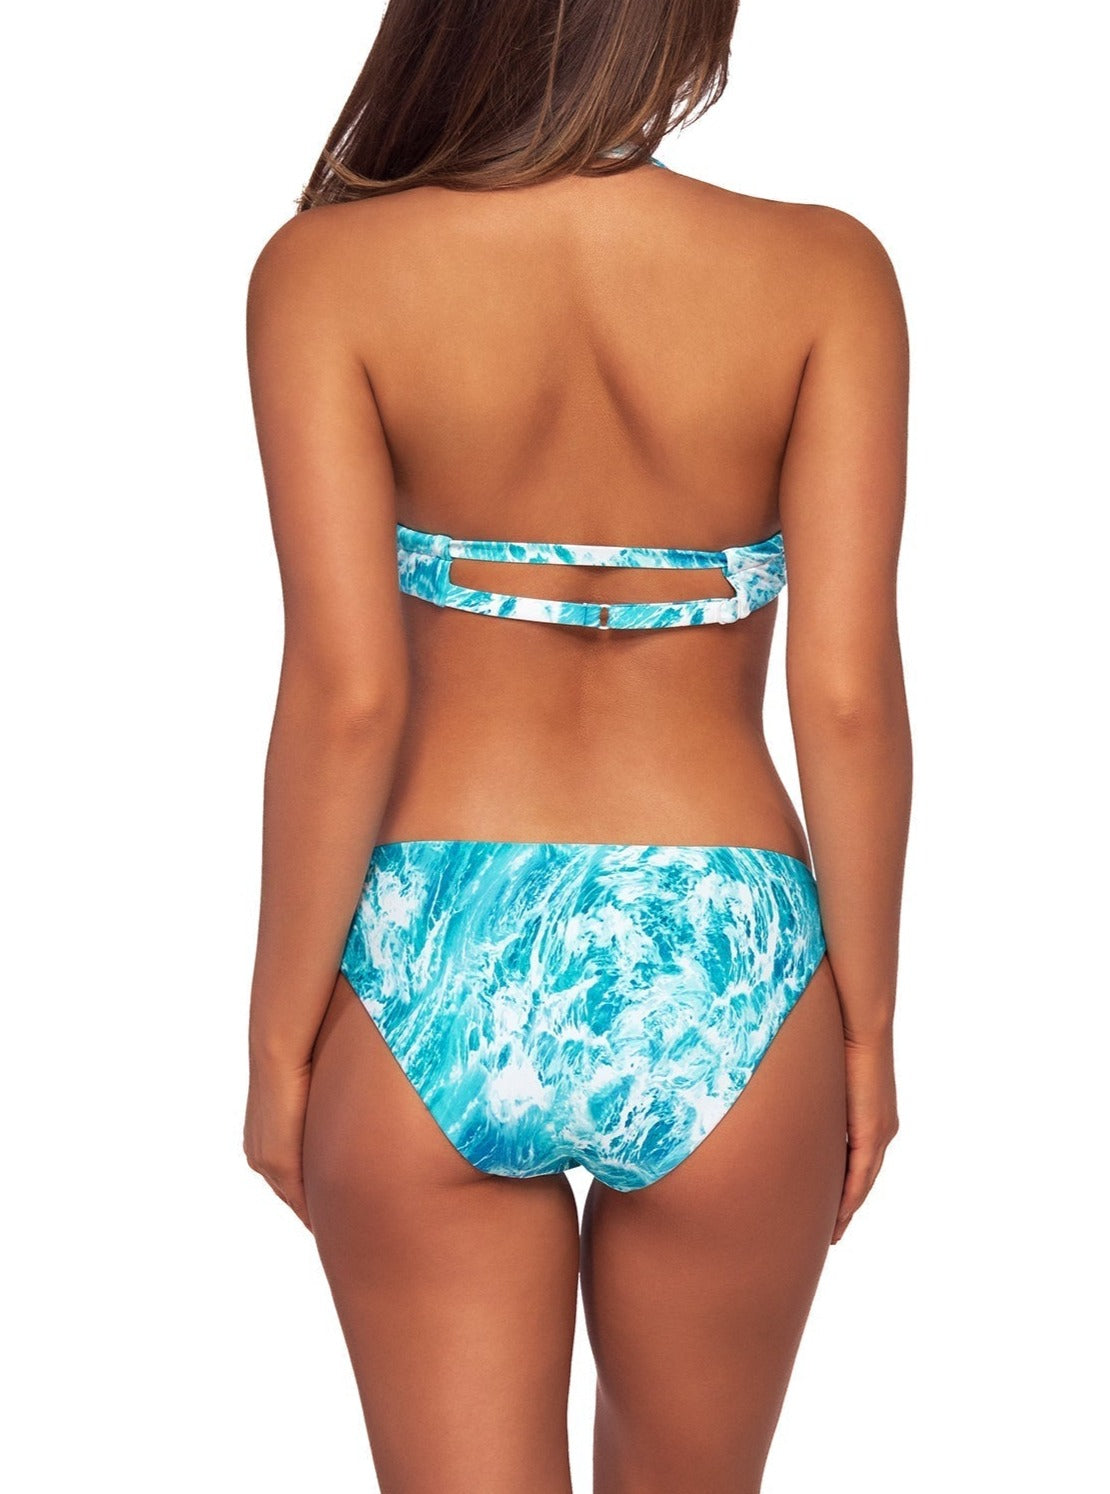 Swim Systems "Brands,Swimwear" XS / OUTSE / T527 Swim Systems Out to Sea Hanalei Halter Top